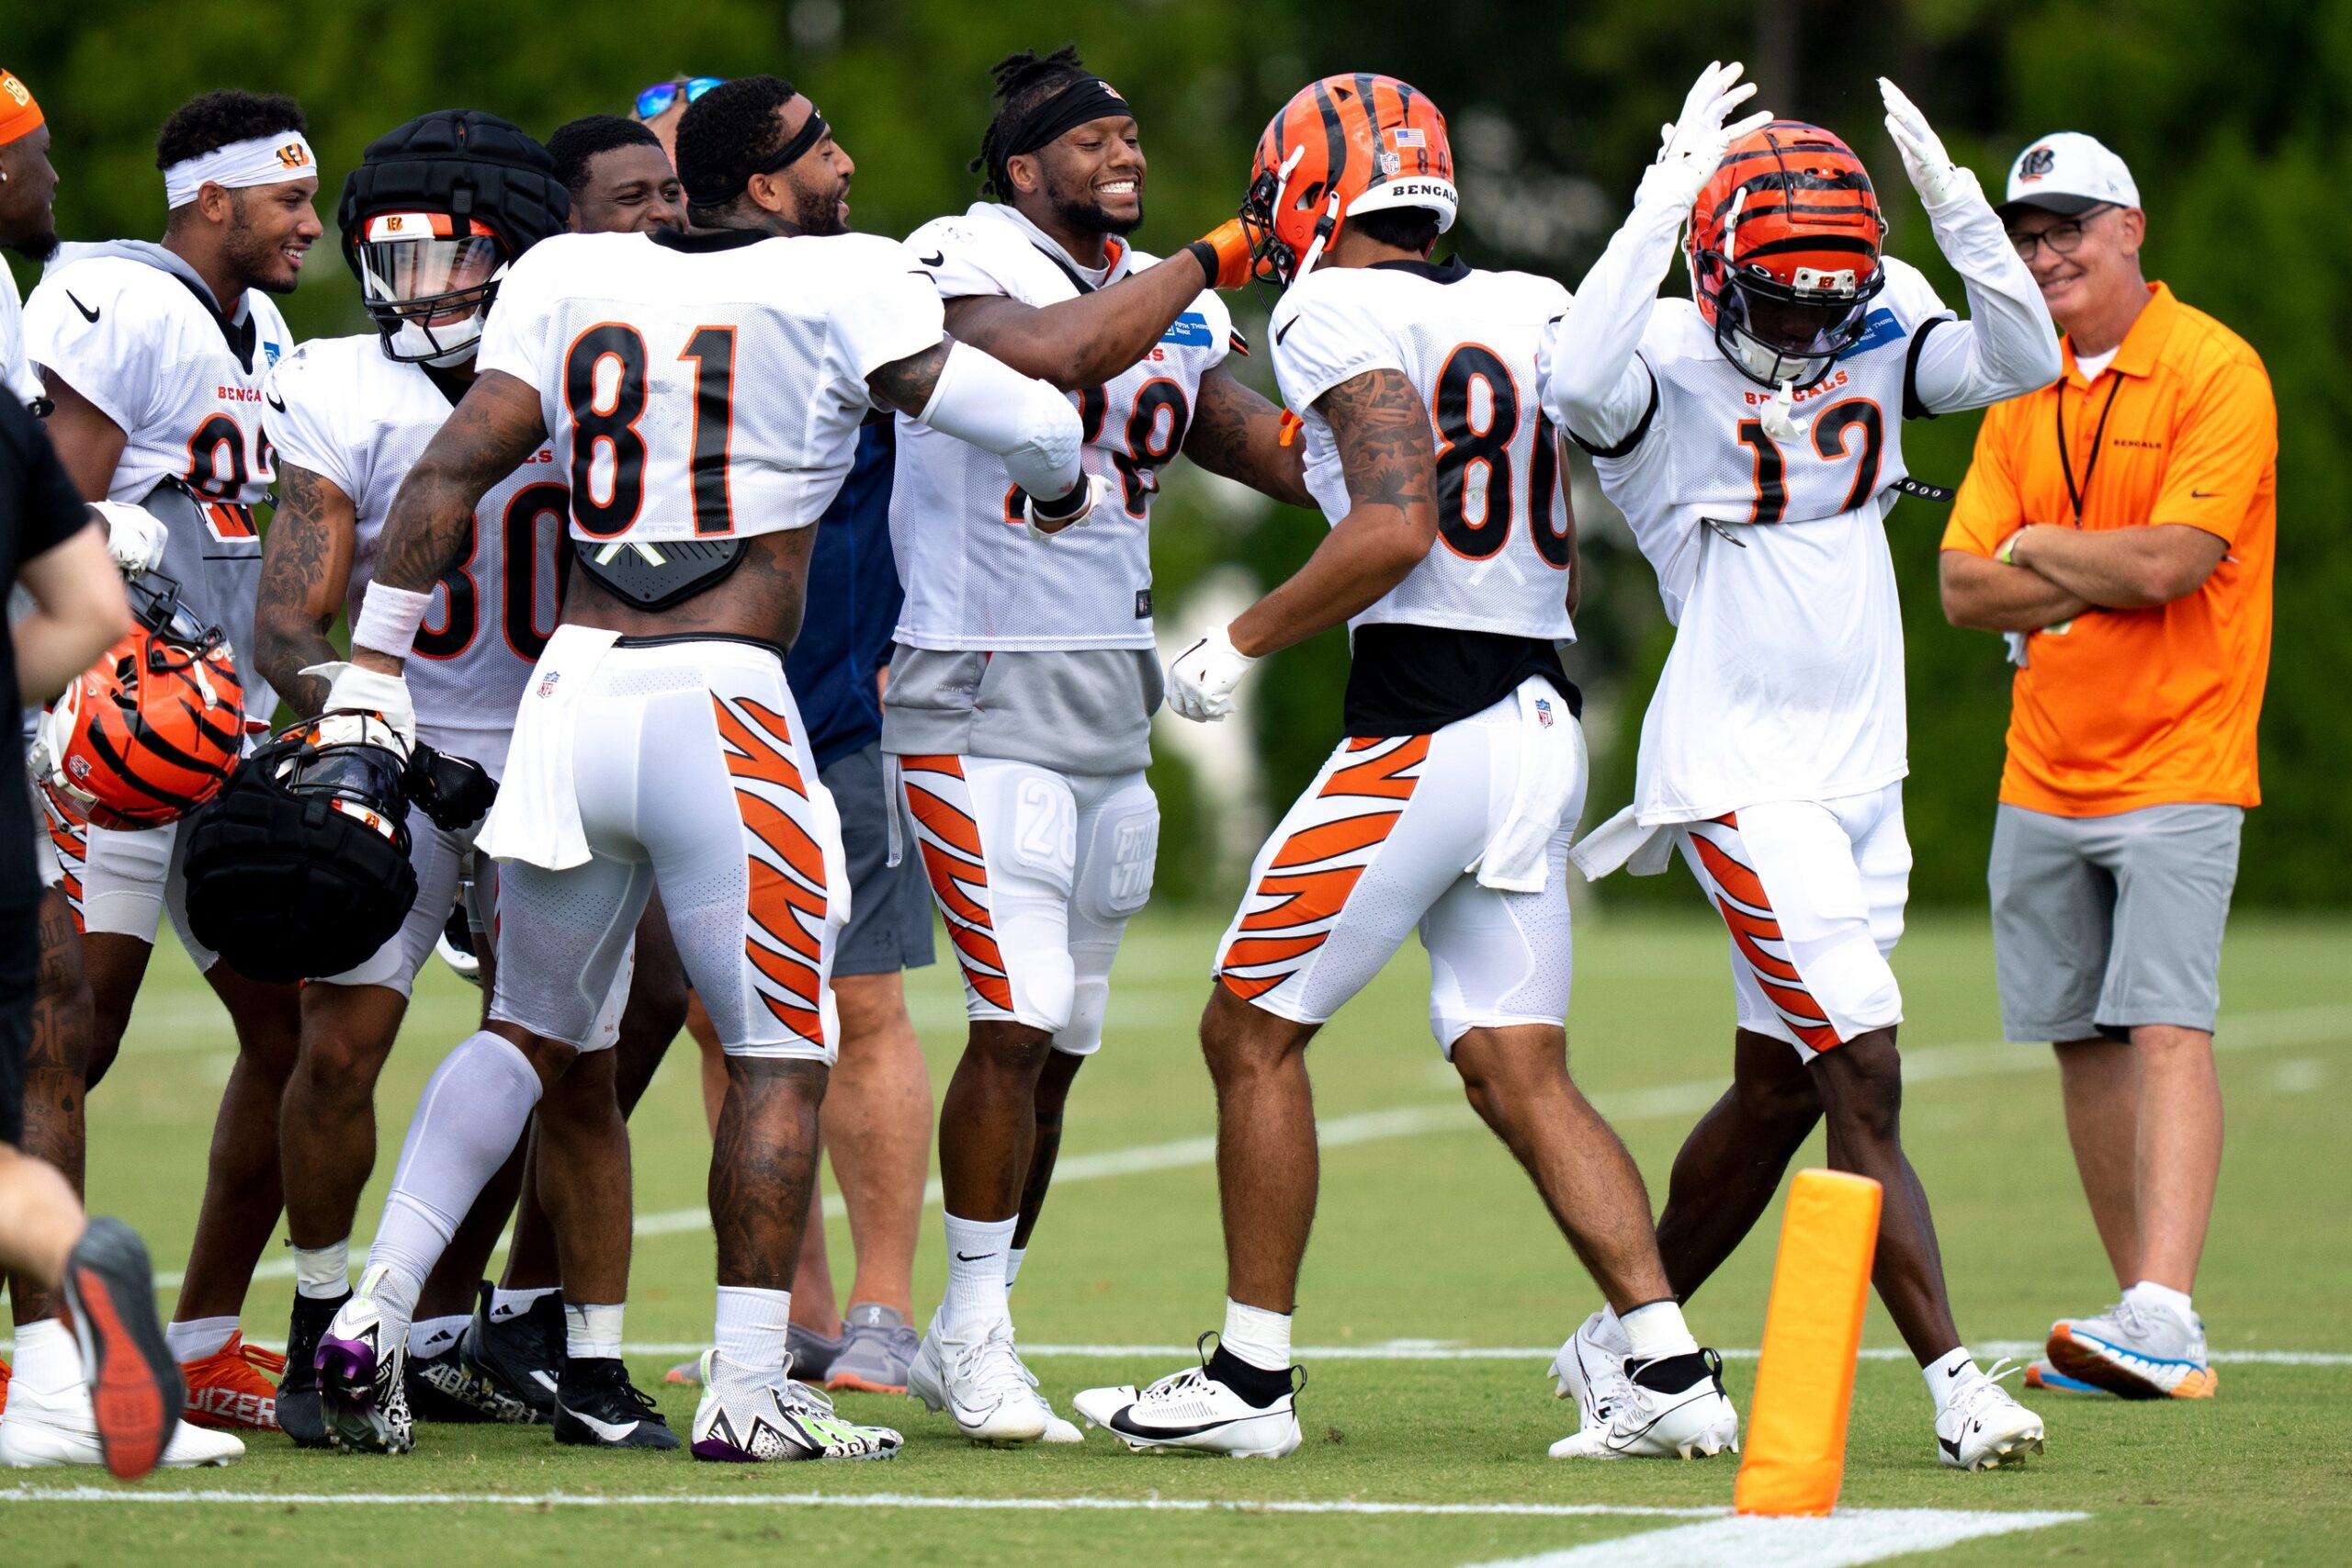 Bengals defense comes up big late to help lift team to 27-15 win